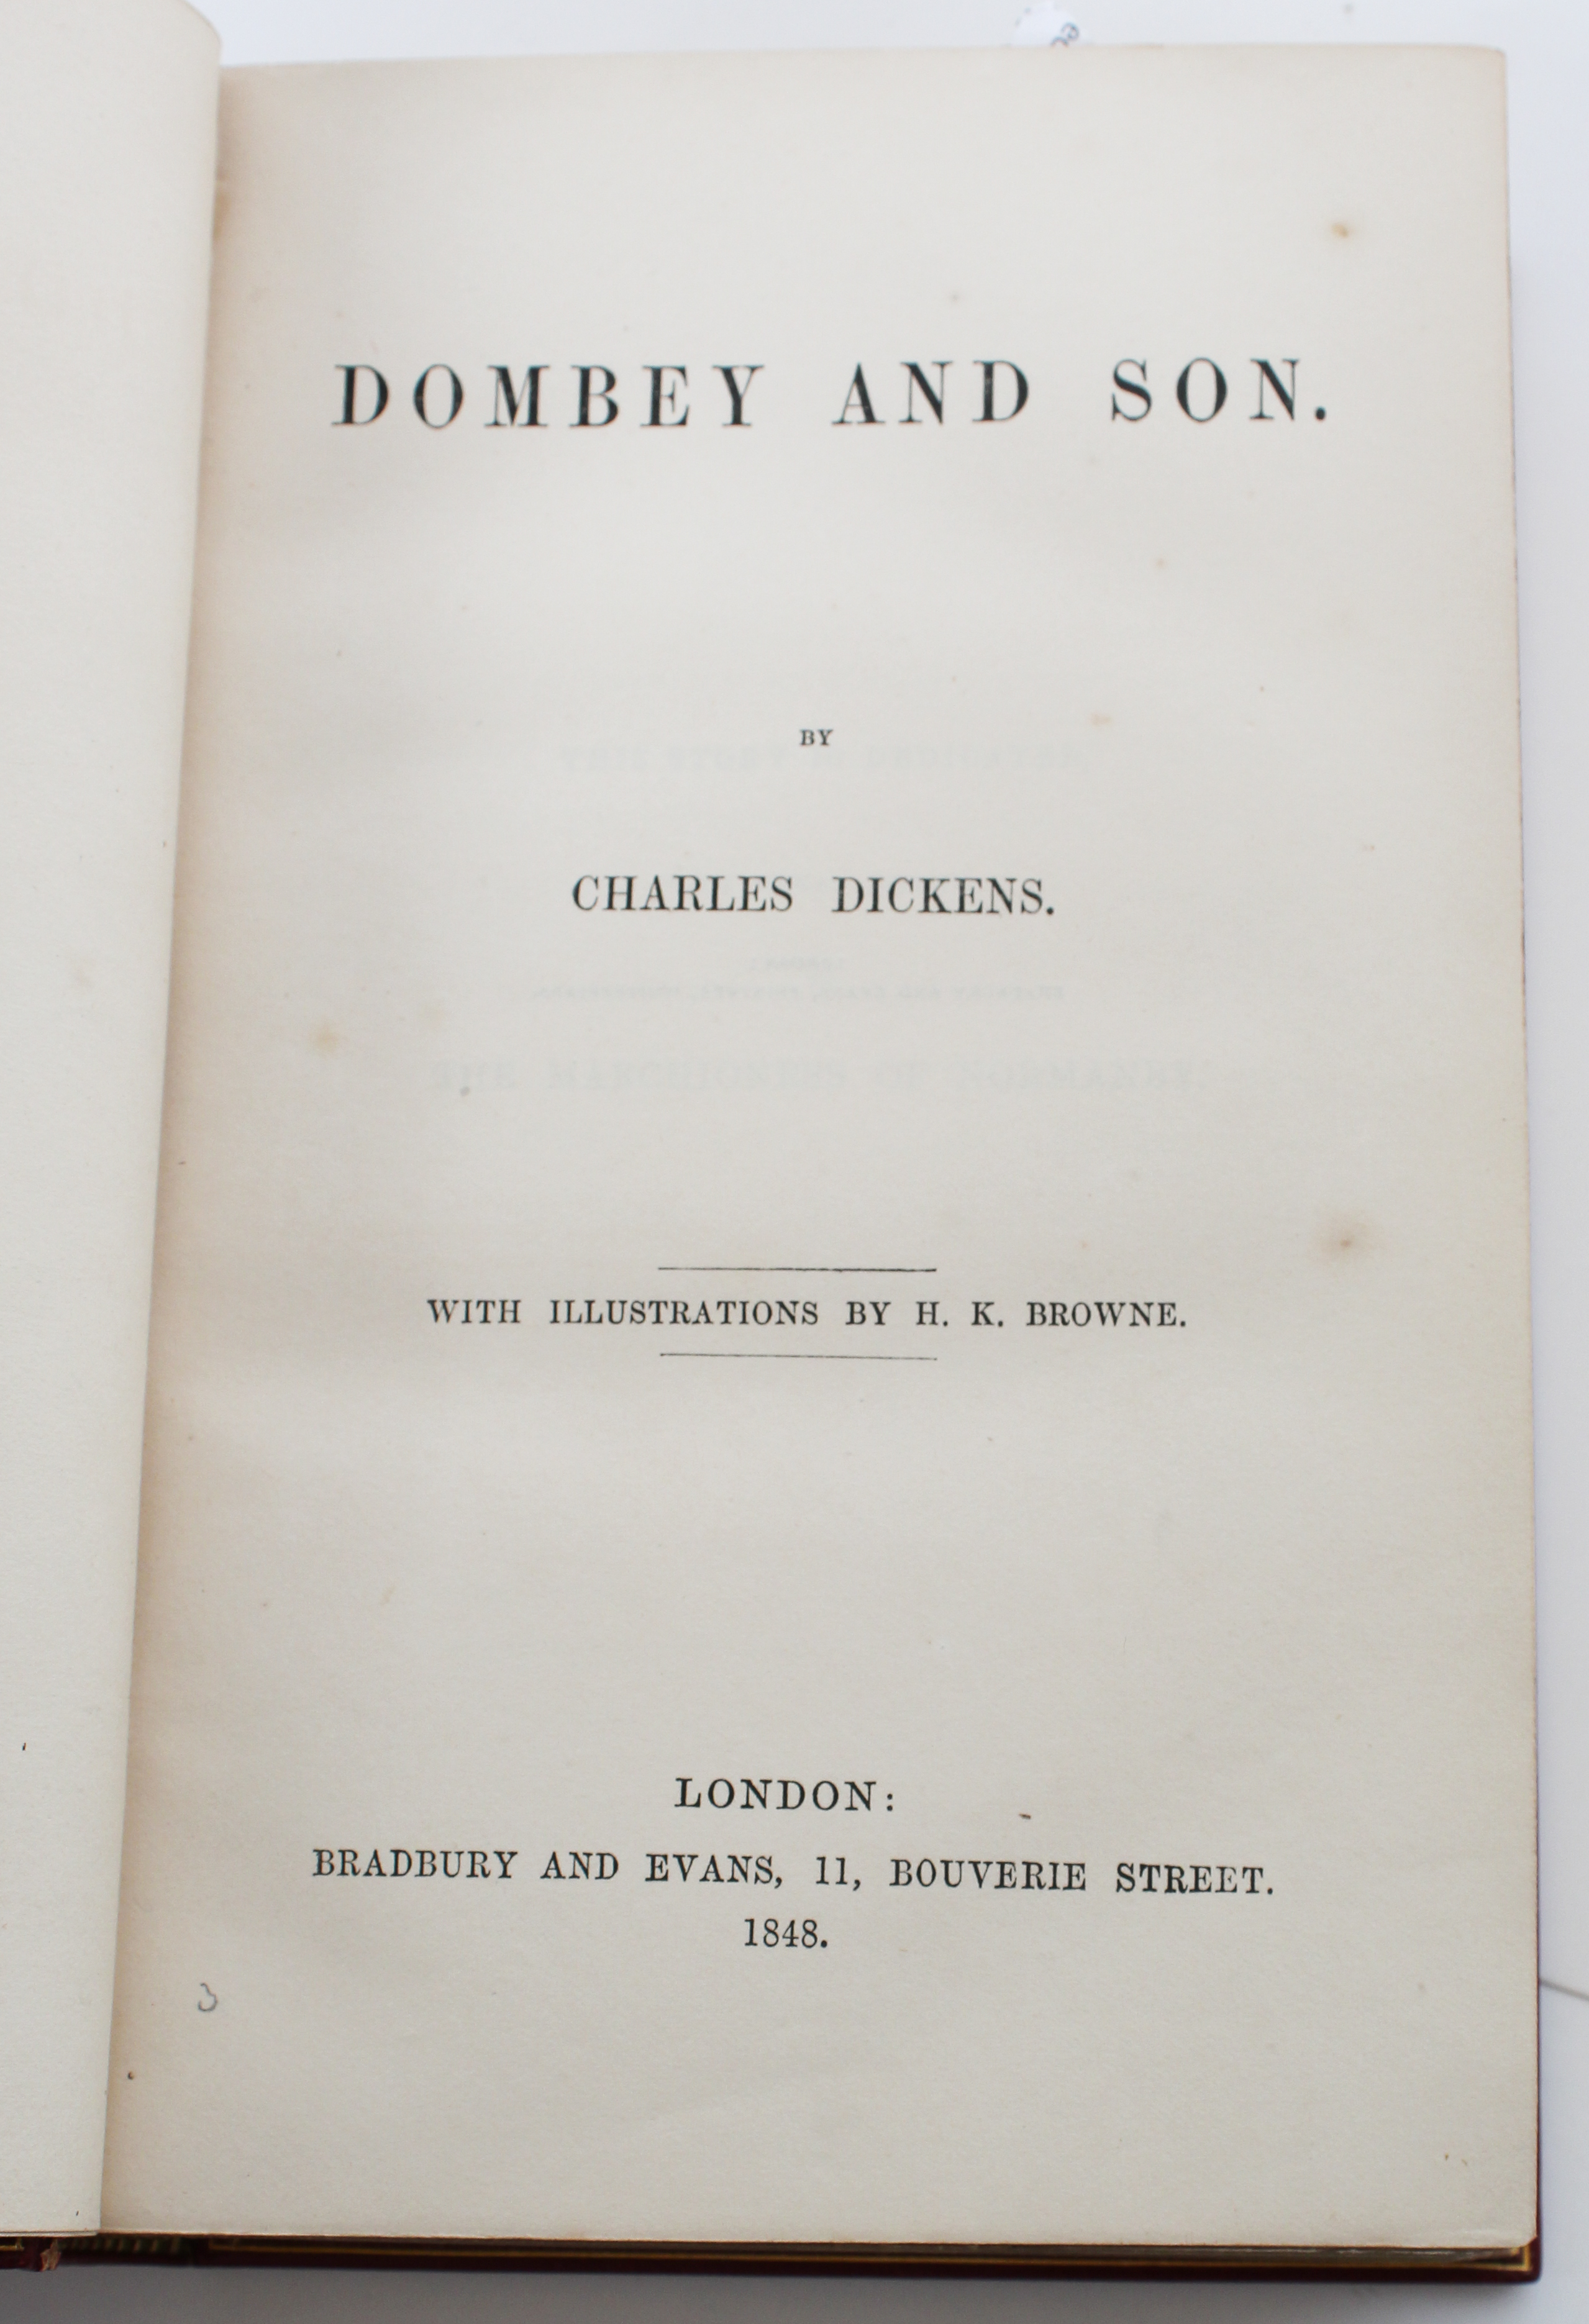 Charles Dickens, Dombey & Son, 1st Ed 1848 - Image 5 of 5